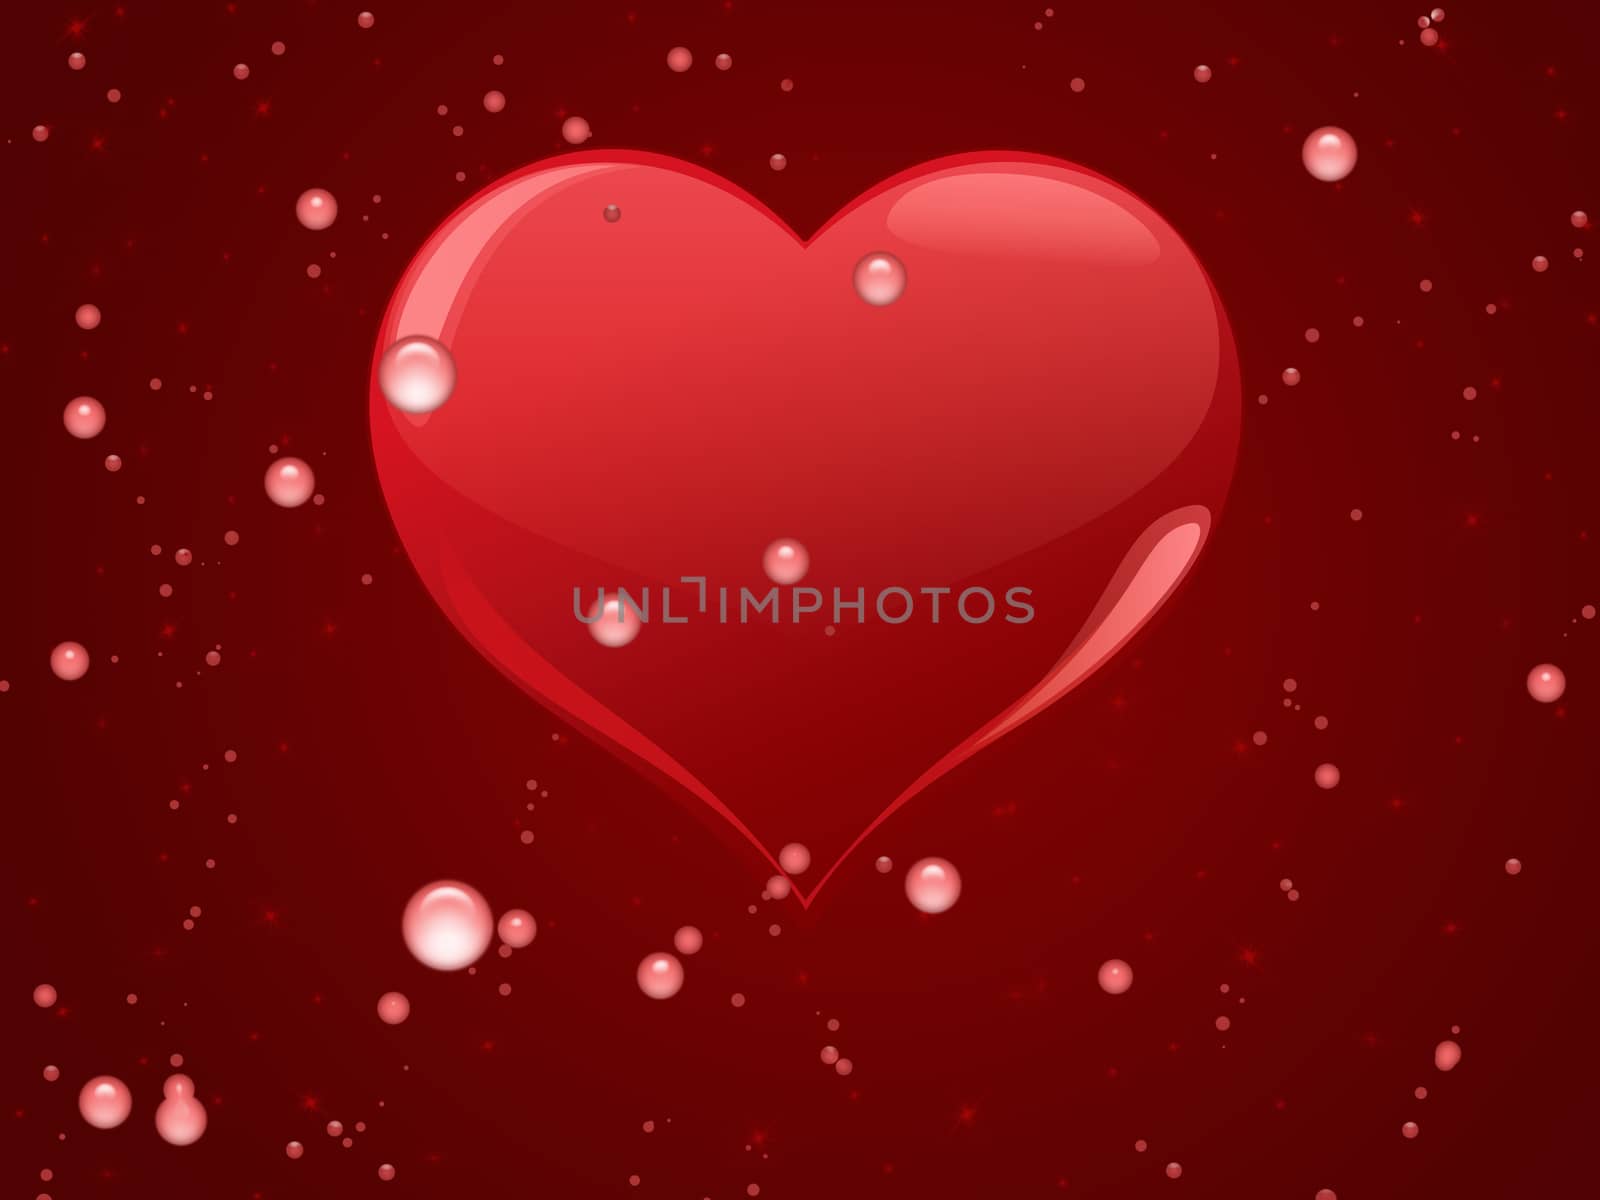 red heart with drops of water in front